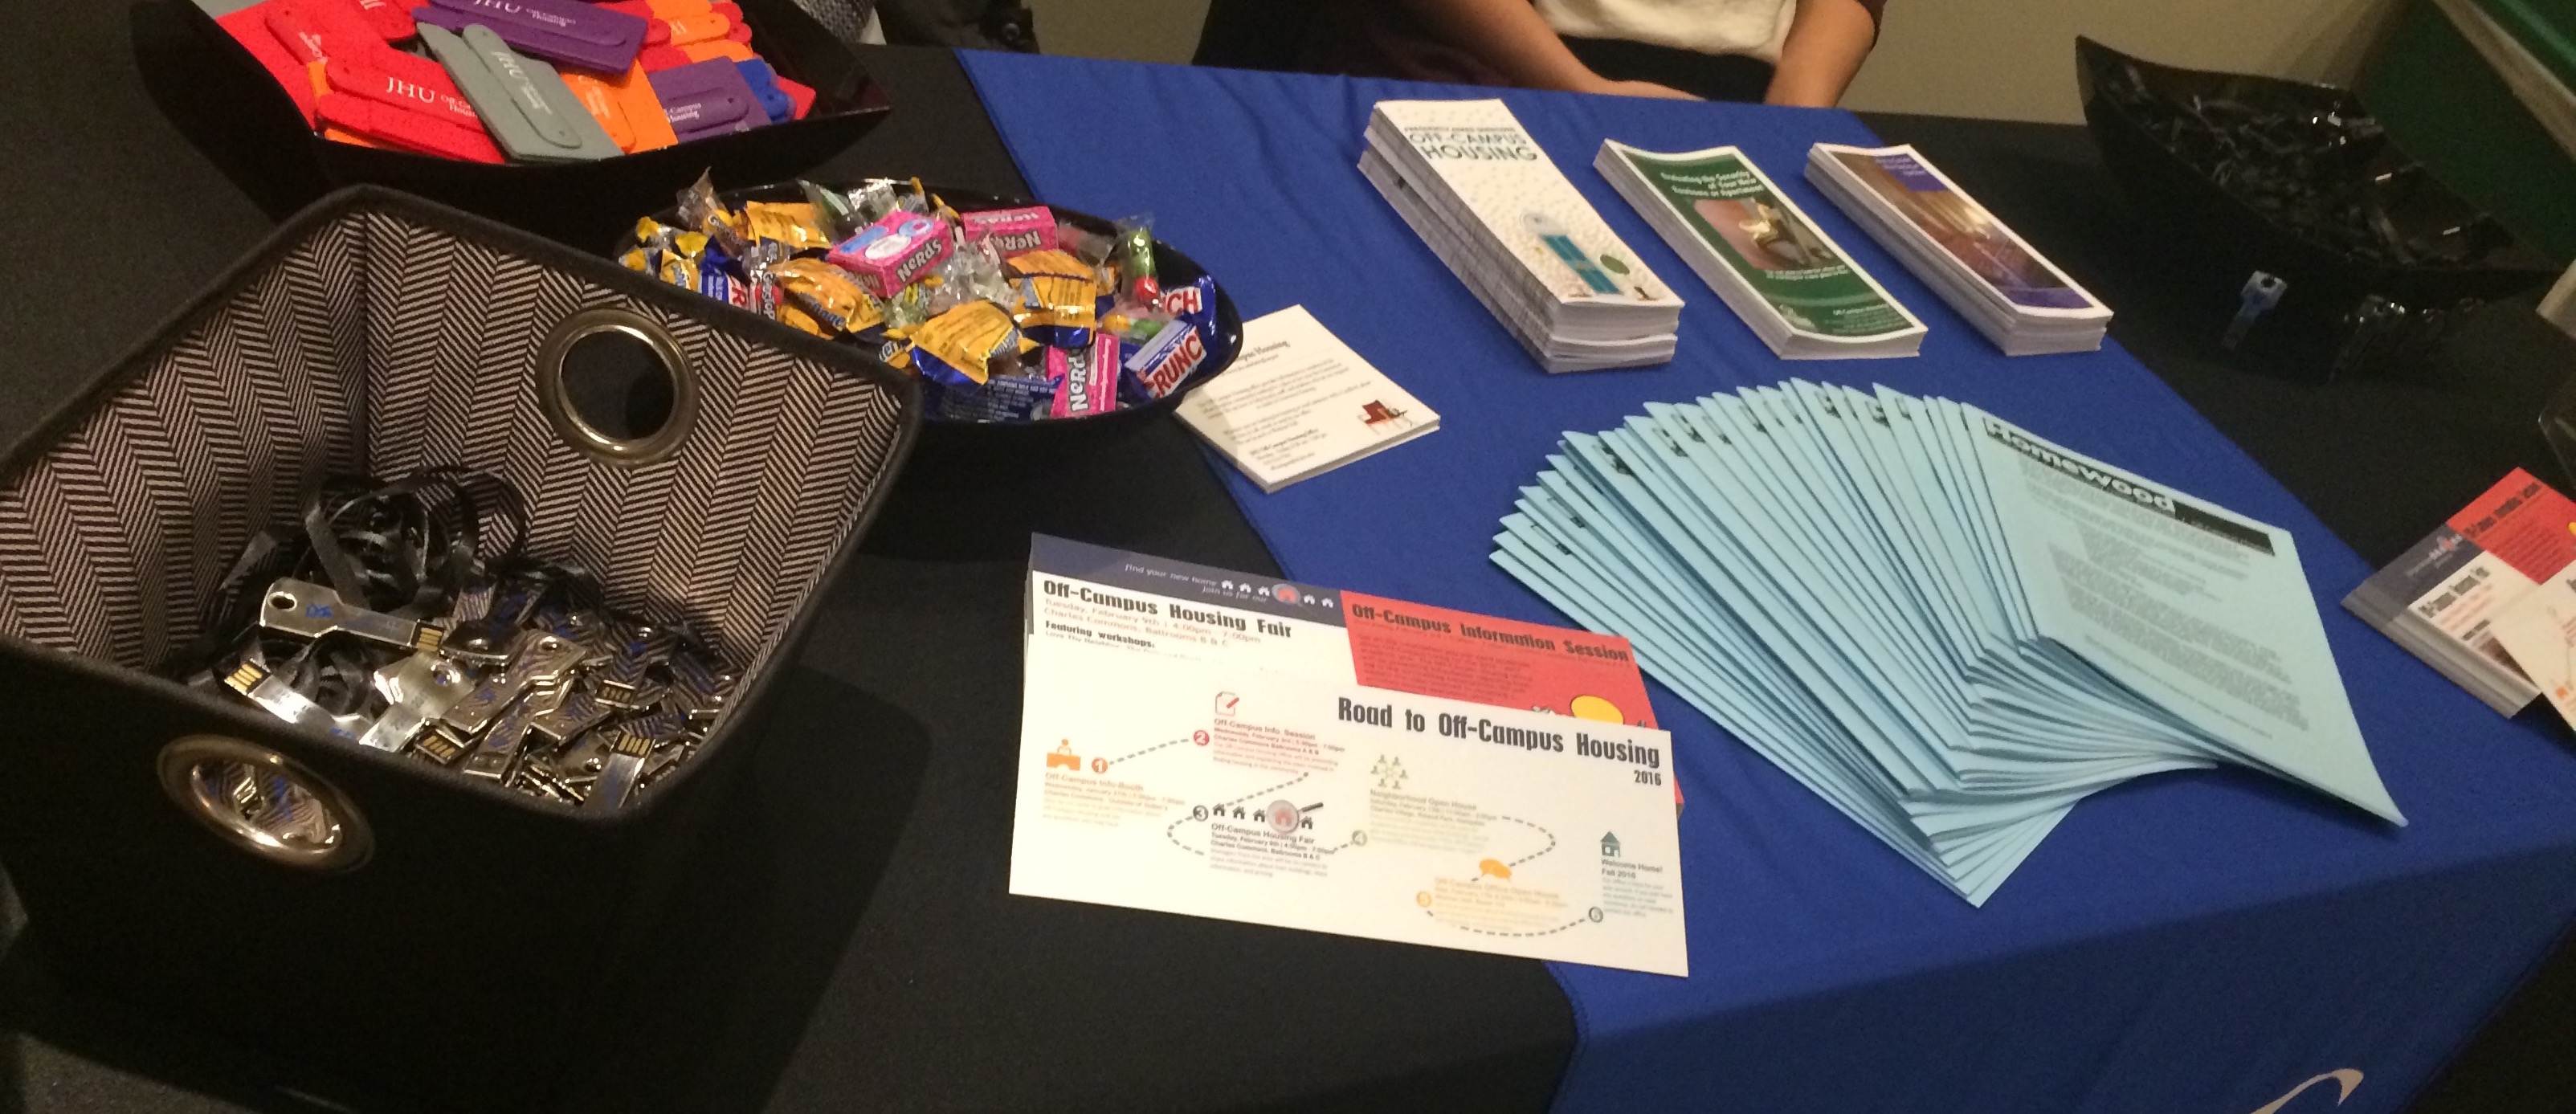 A table full of giveaways including various pamphlets and candy.